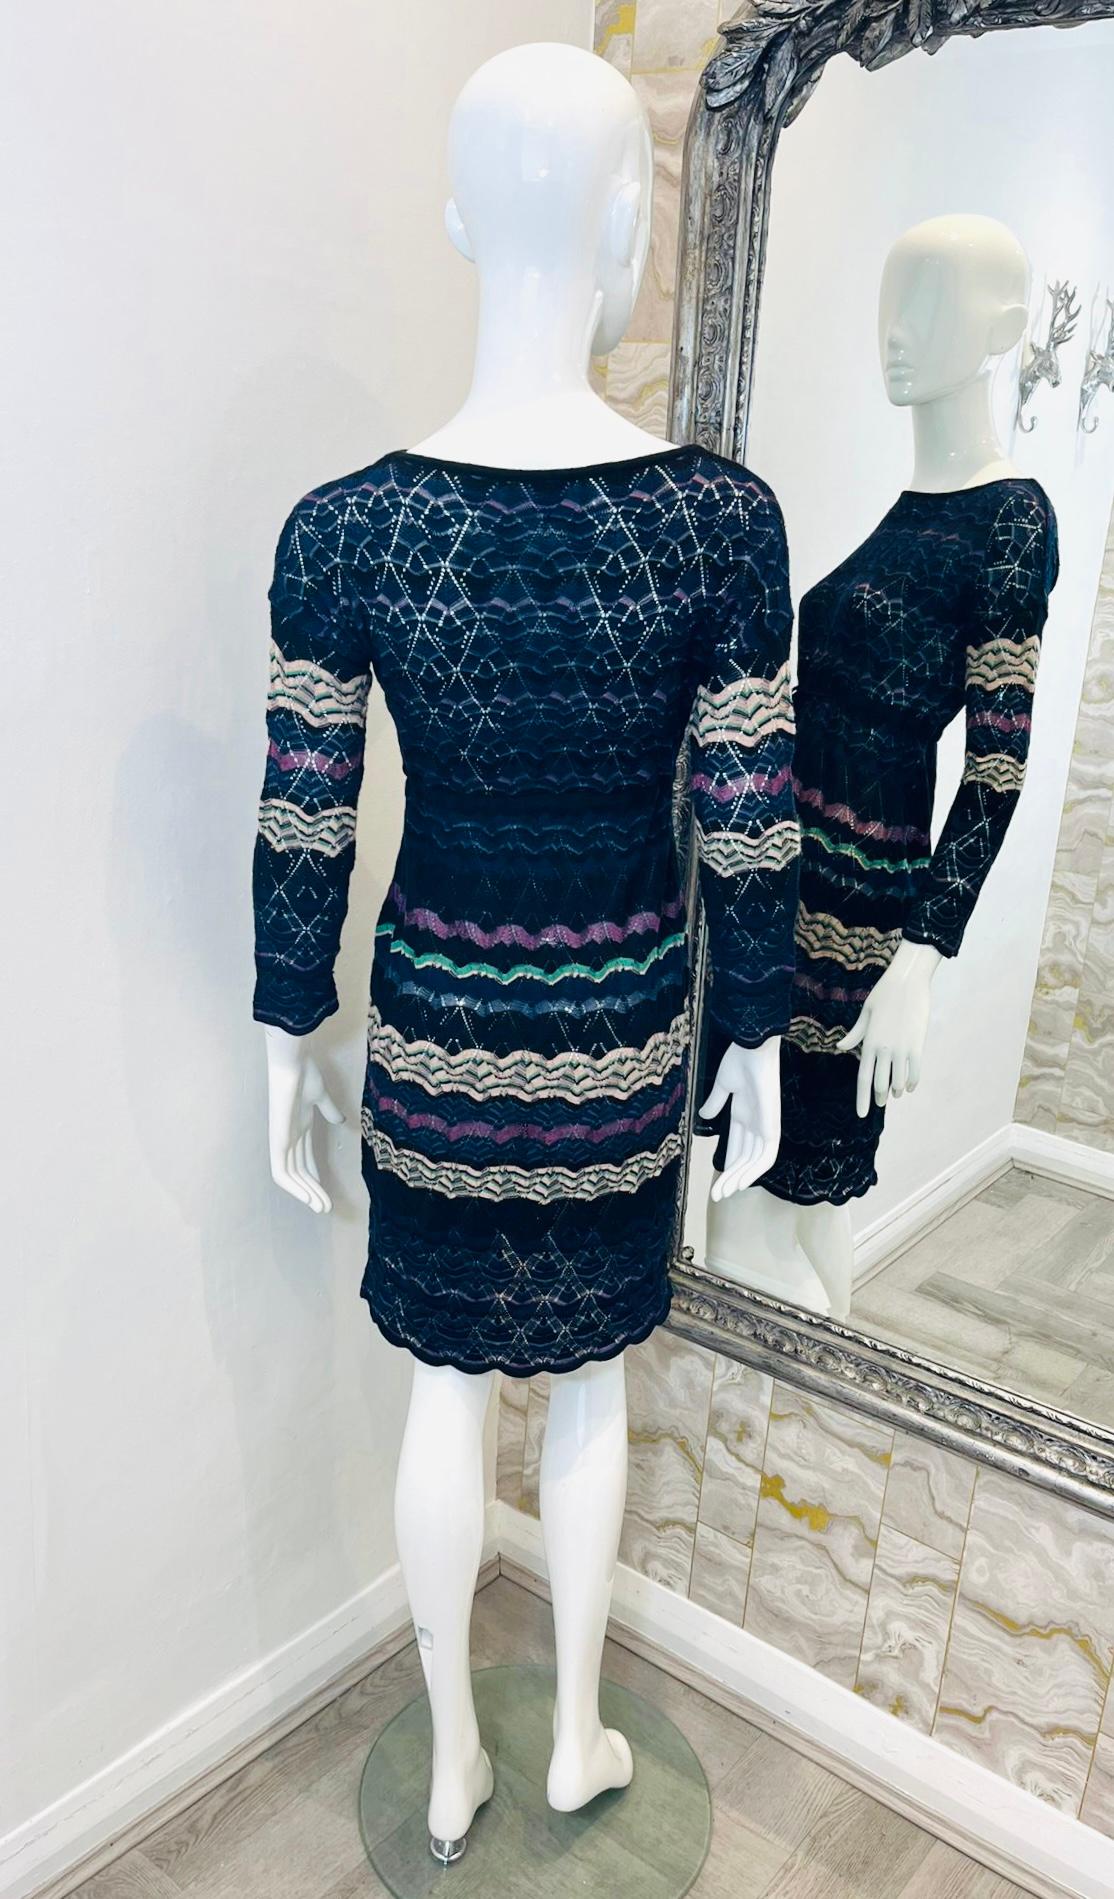 Missoni Crochet Knit Striped Dress In Excellent Condition For Sale In London, GB